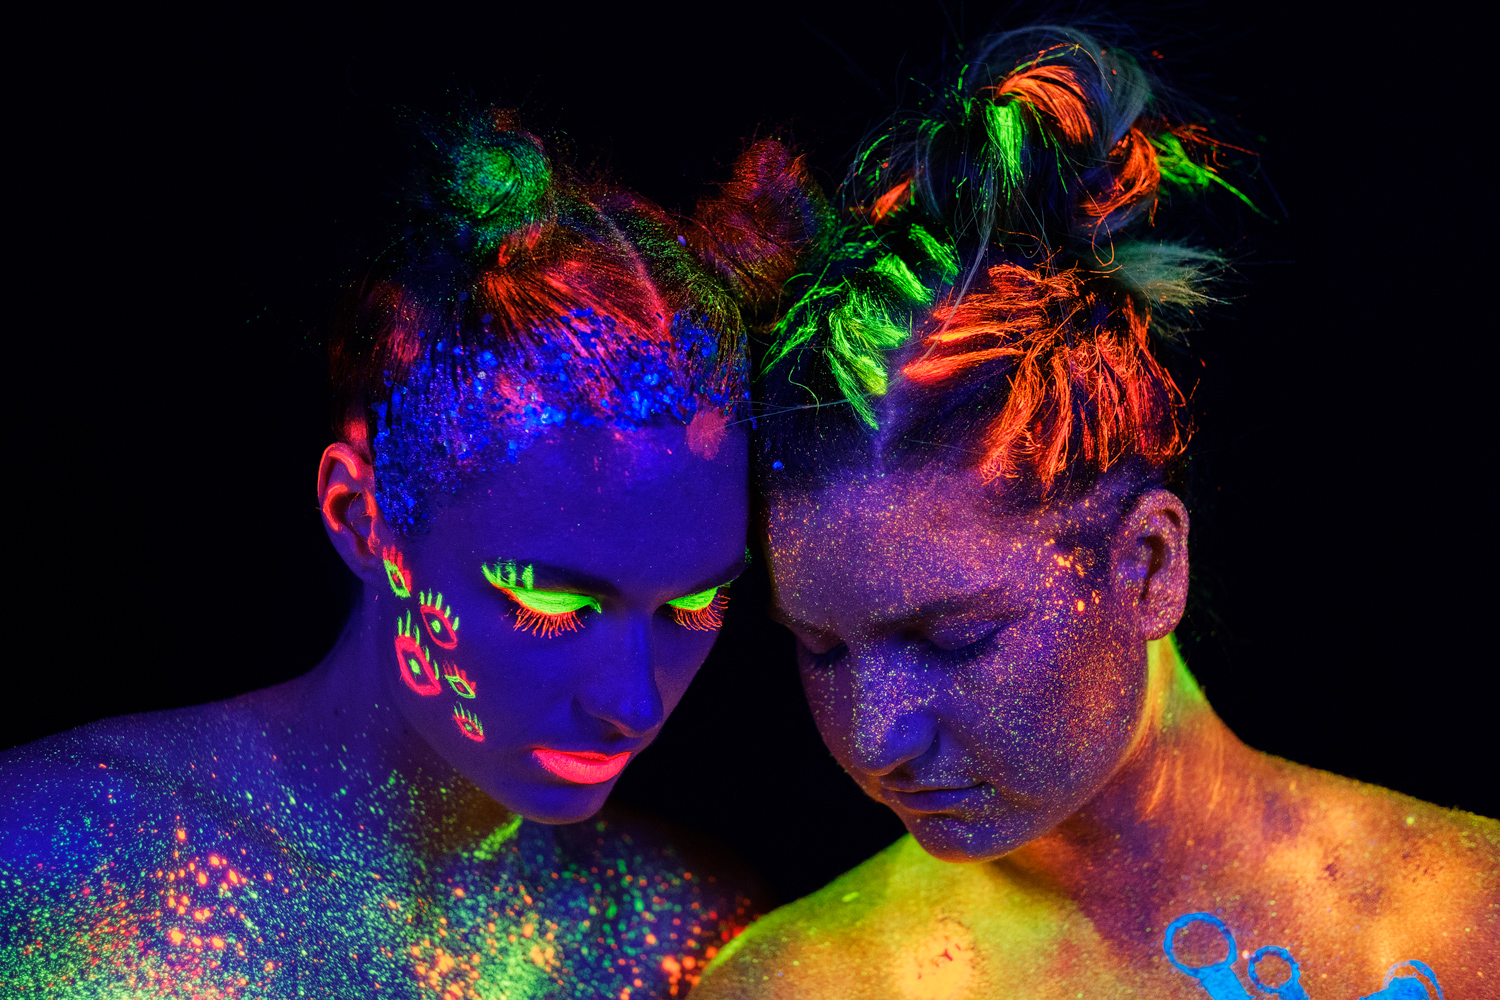 Everyone captured some gorgeous images and had such a fun night at my Neon Glow Black Light / UV Light workshop last night. Big thanks to our amazing models @berniegasm and @sasskia.model and to Jess from @jessaleemakeuphairdesign for the awesome designs and body painting.  I think I might have to run this one again in a few months.. who's keen?